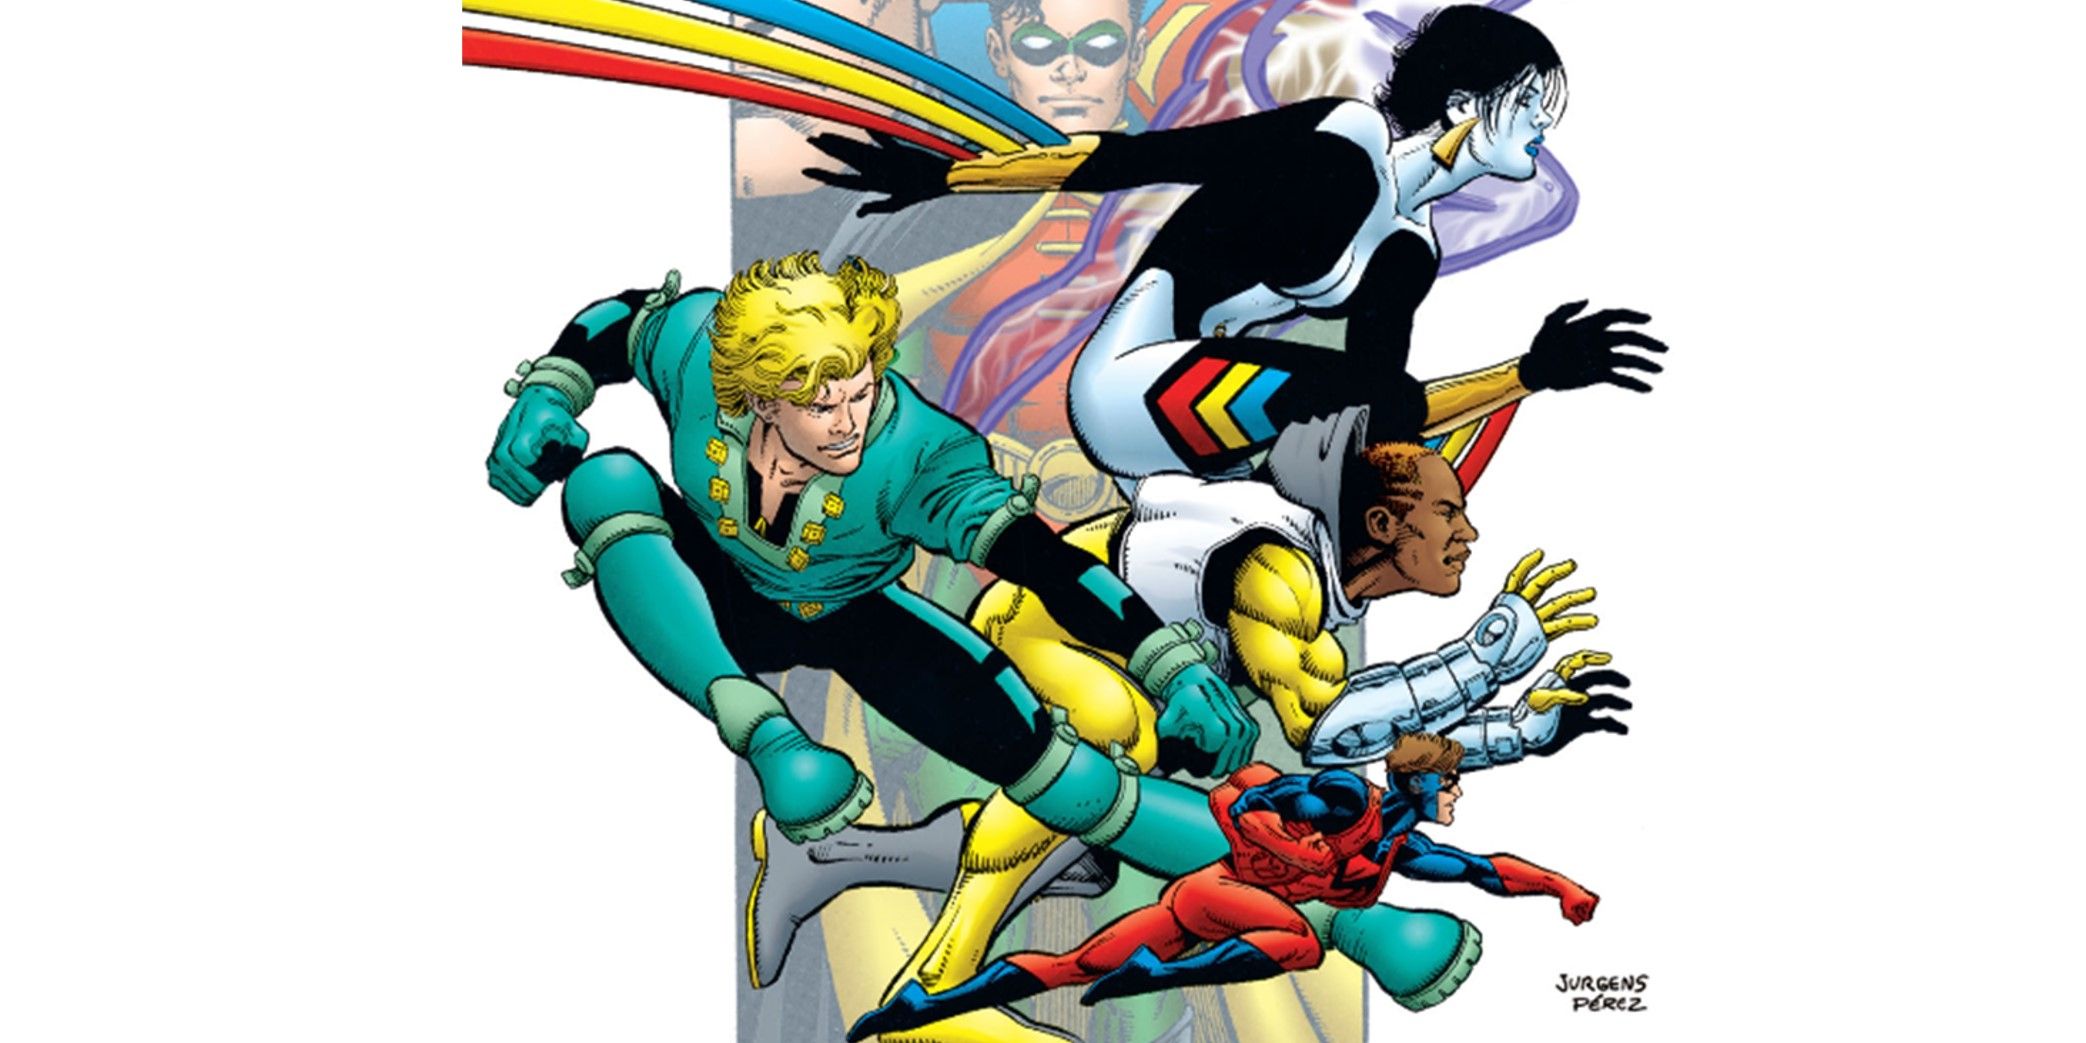 The Teen Titans from The Atom's team.